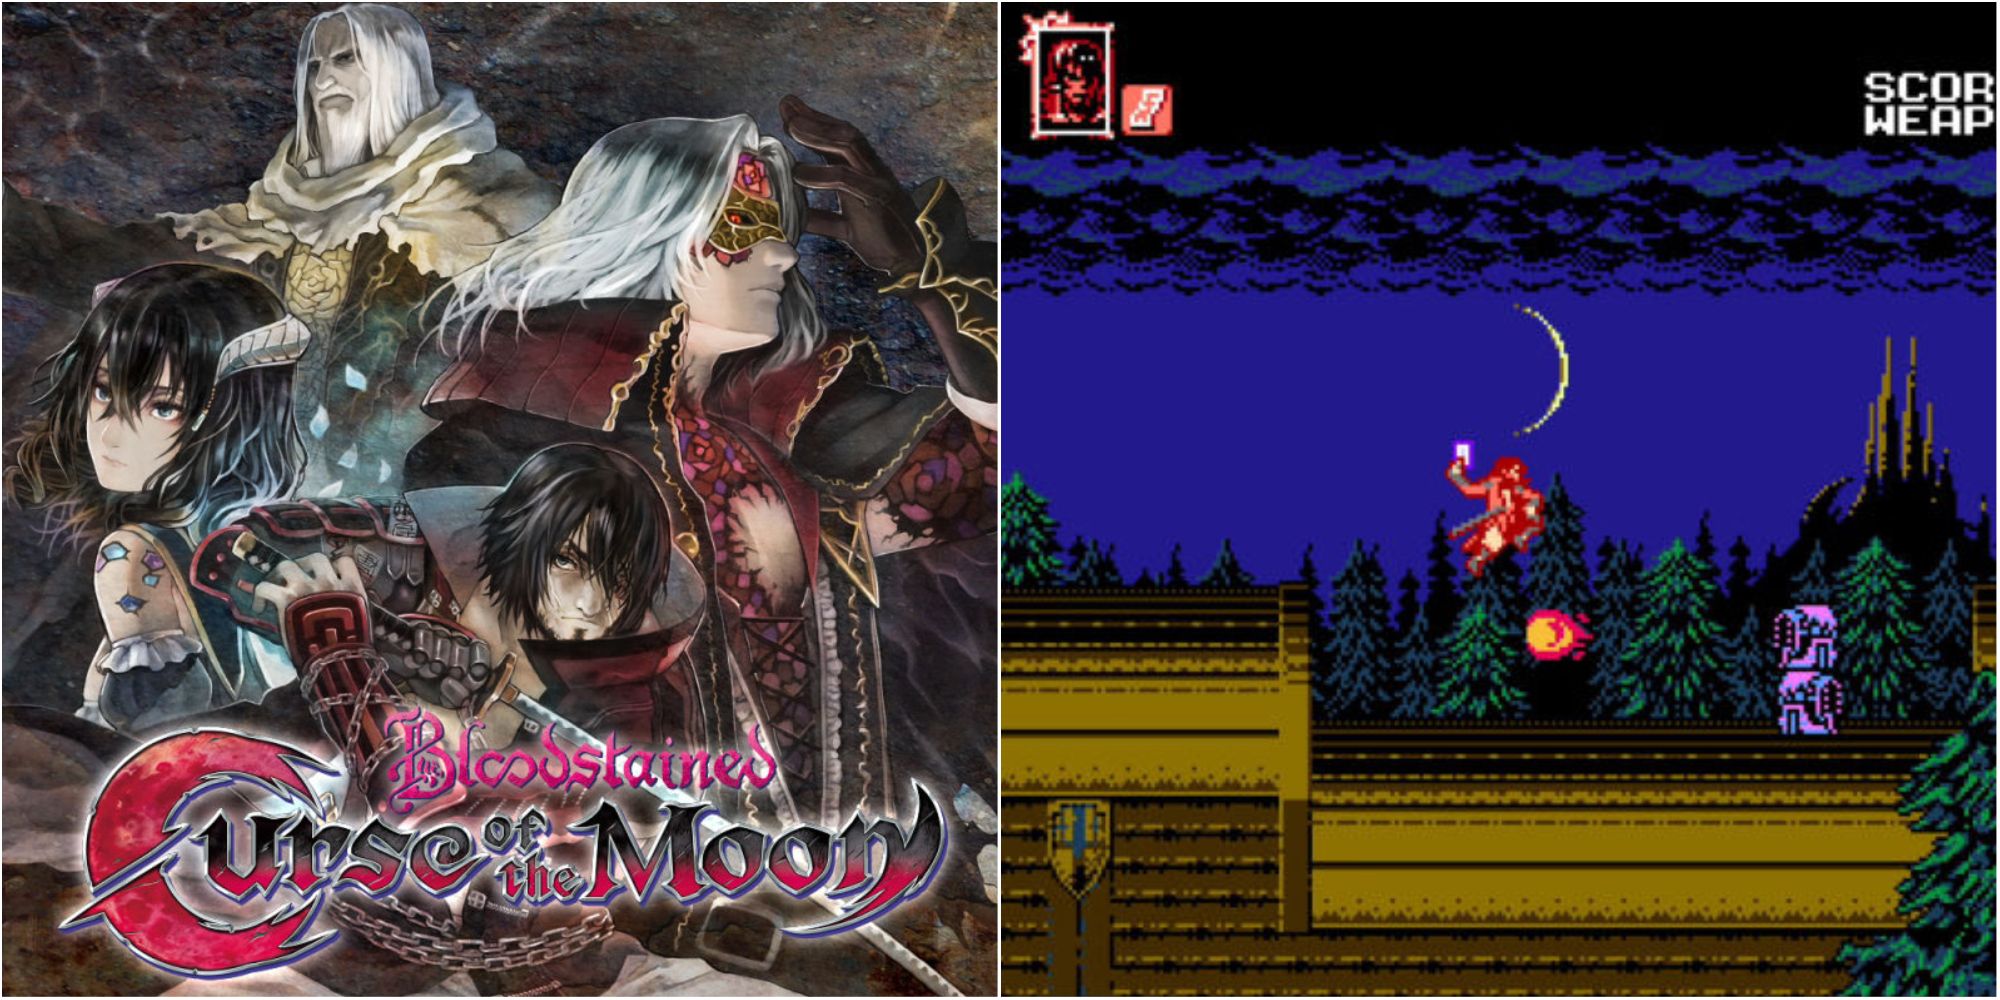 bloodstained cover & gameplay